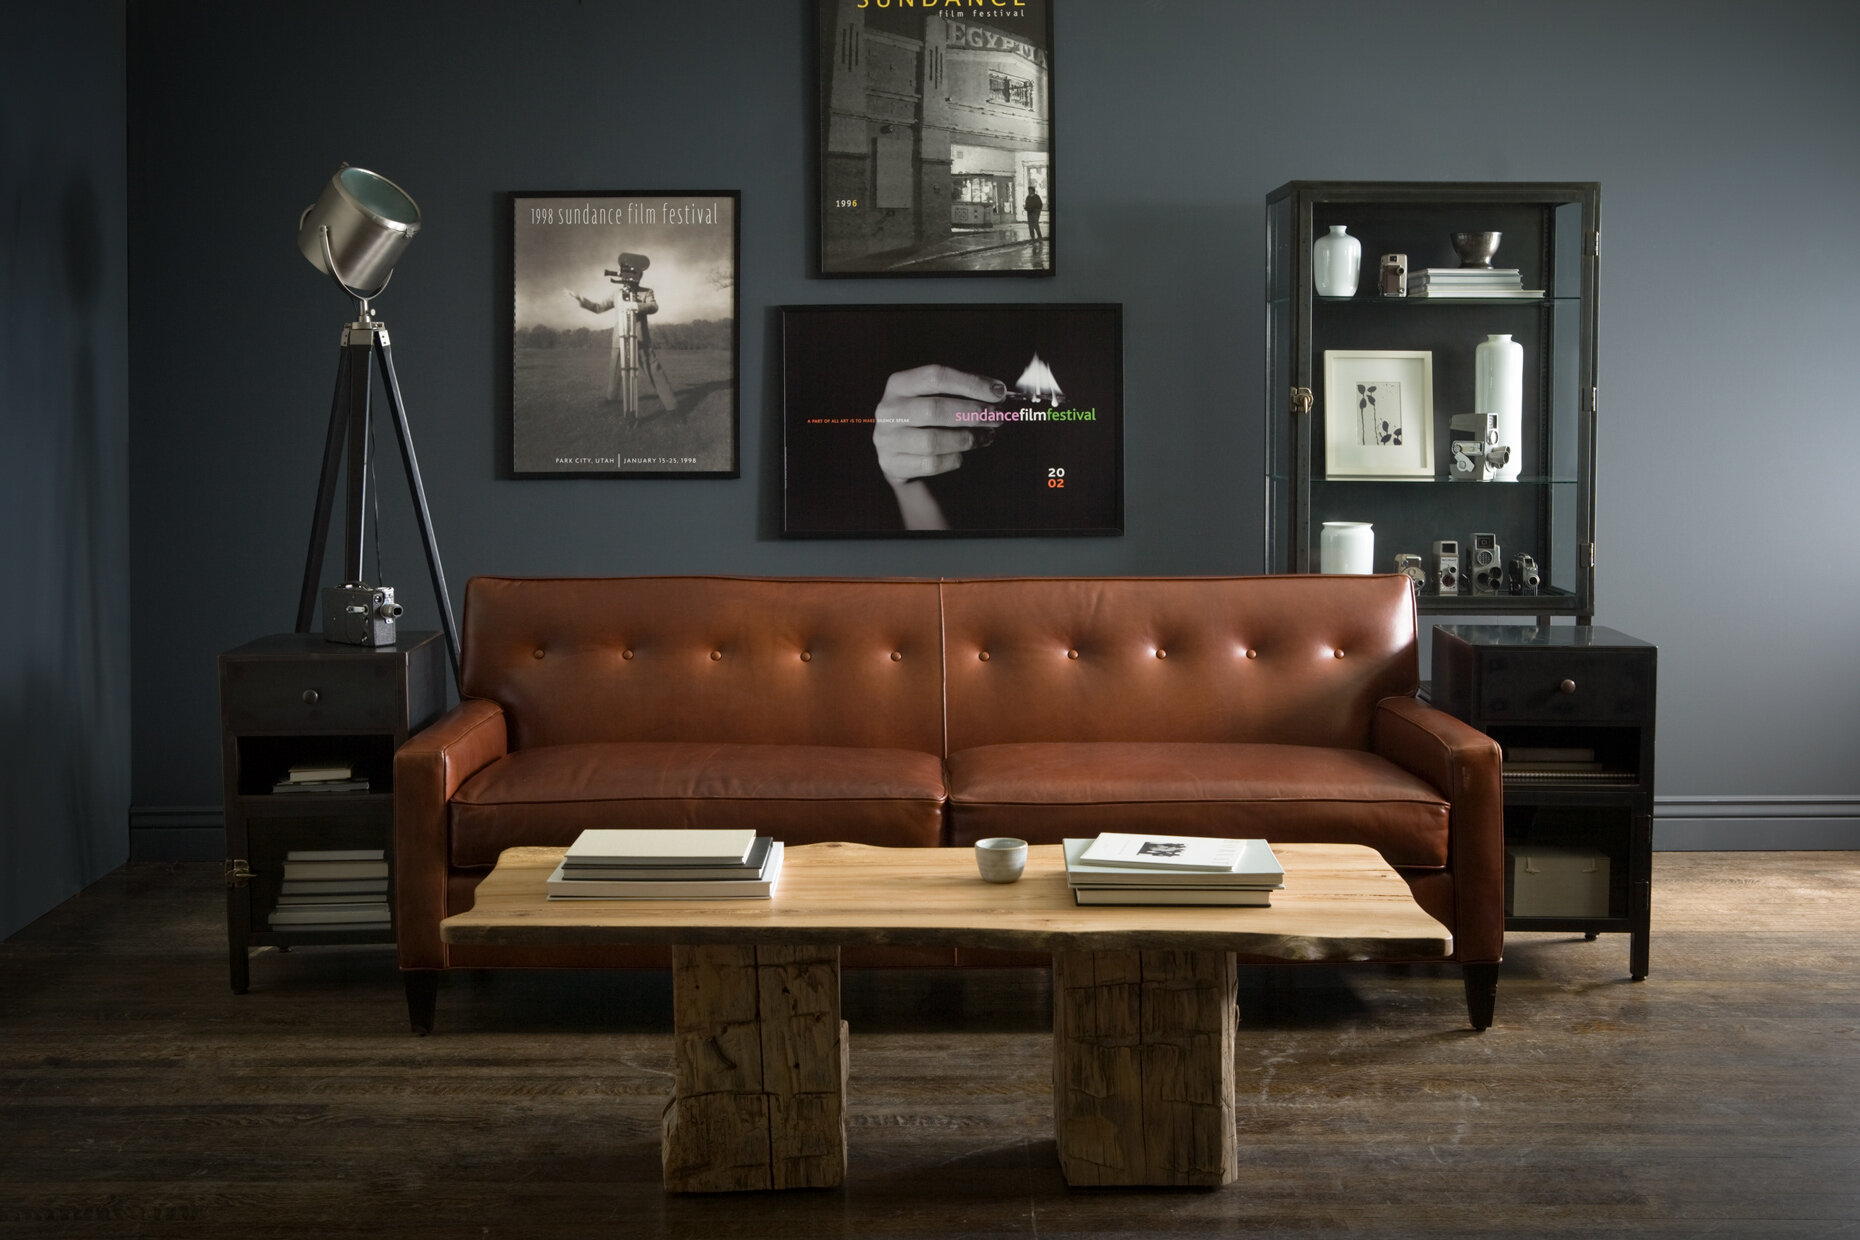 Product_Photography_Spaces_Derek_Israelsen_017_Brown_Leather_Couch.jpg